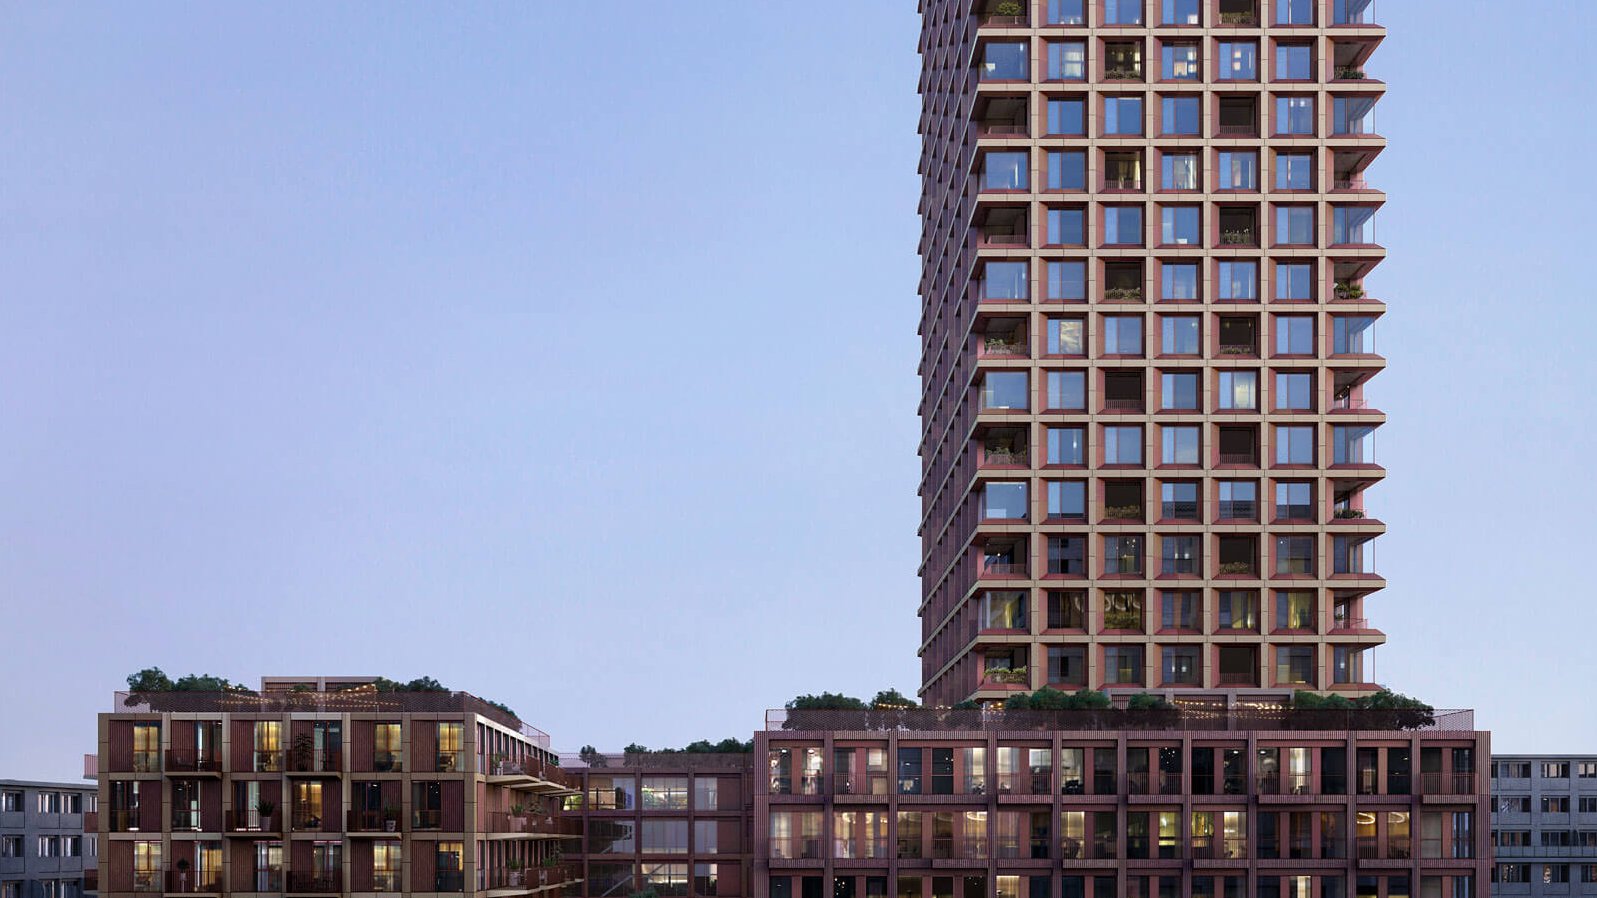 Study contract for one of the tallest timber residential buildings in the world currently being planned.